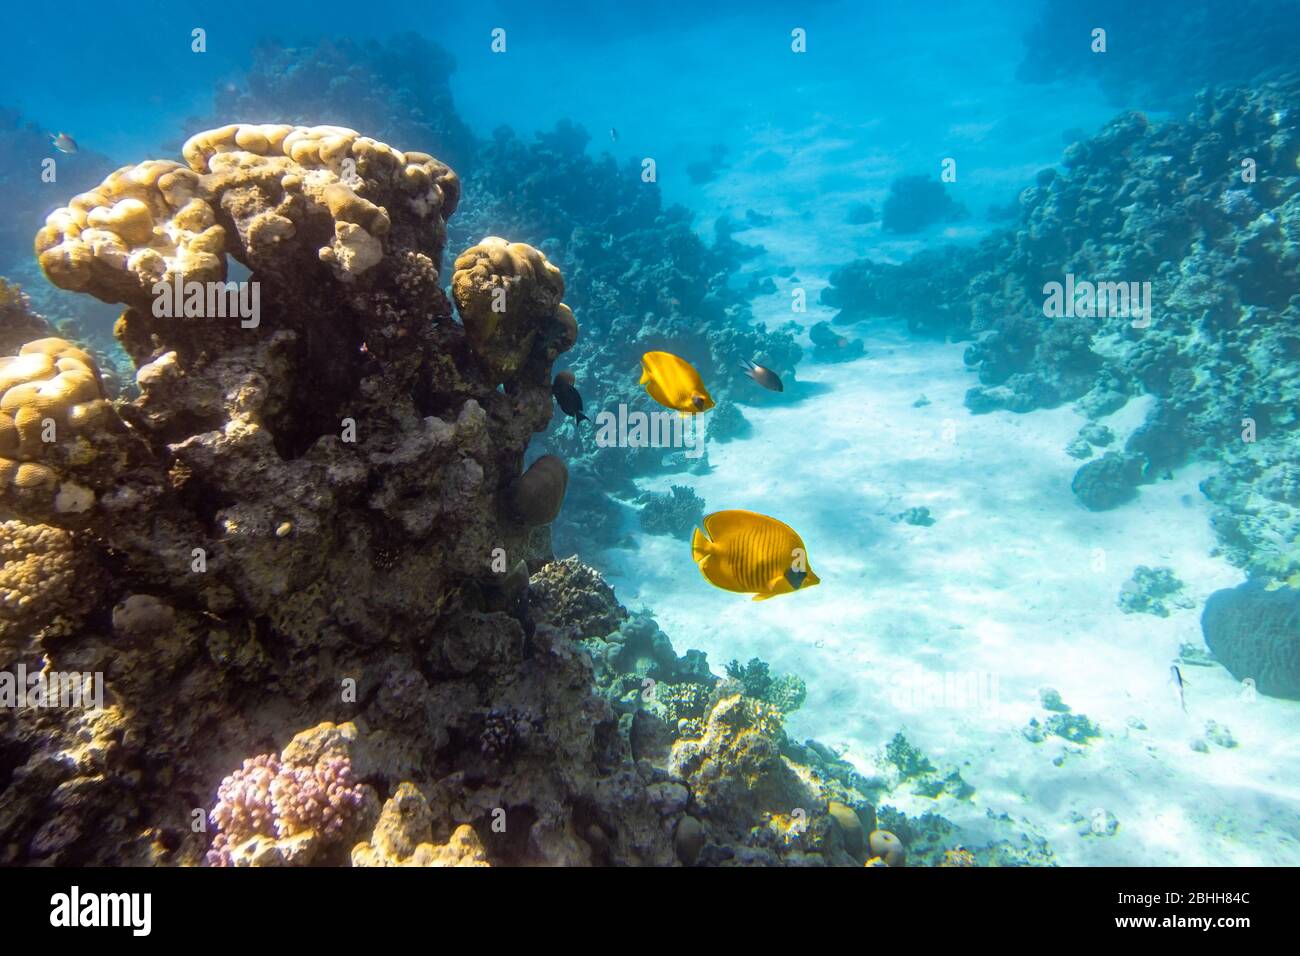 Pair Of Blue-Cheeked Butterflyfish (Chaetodon) In a Coral Reef, Red Sea, Egypt. Two Bright Yellow Striped Tropical Fish In The Ocean, Clear Blue Turqu Stock Photo